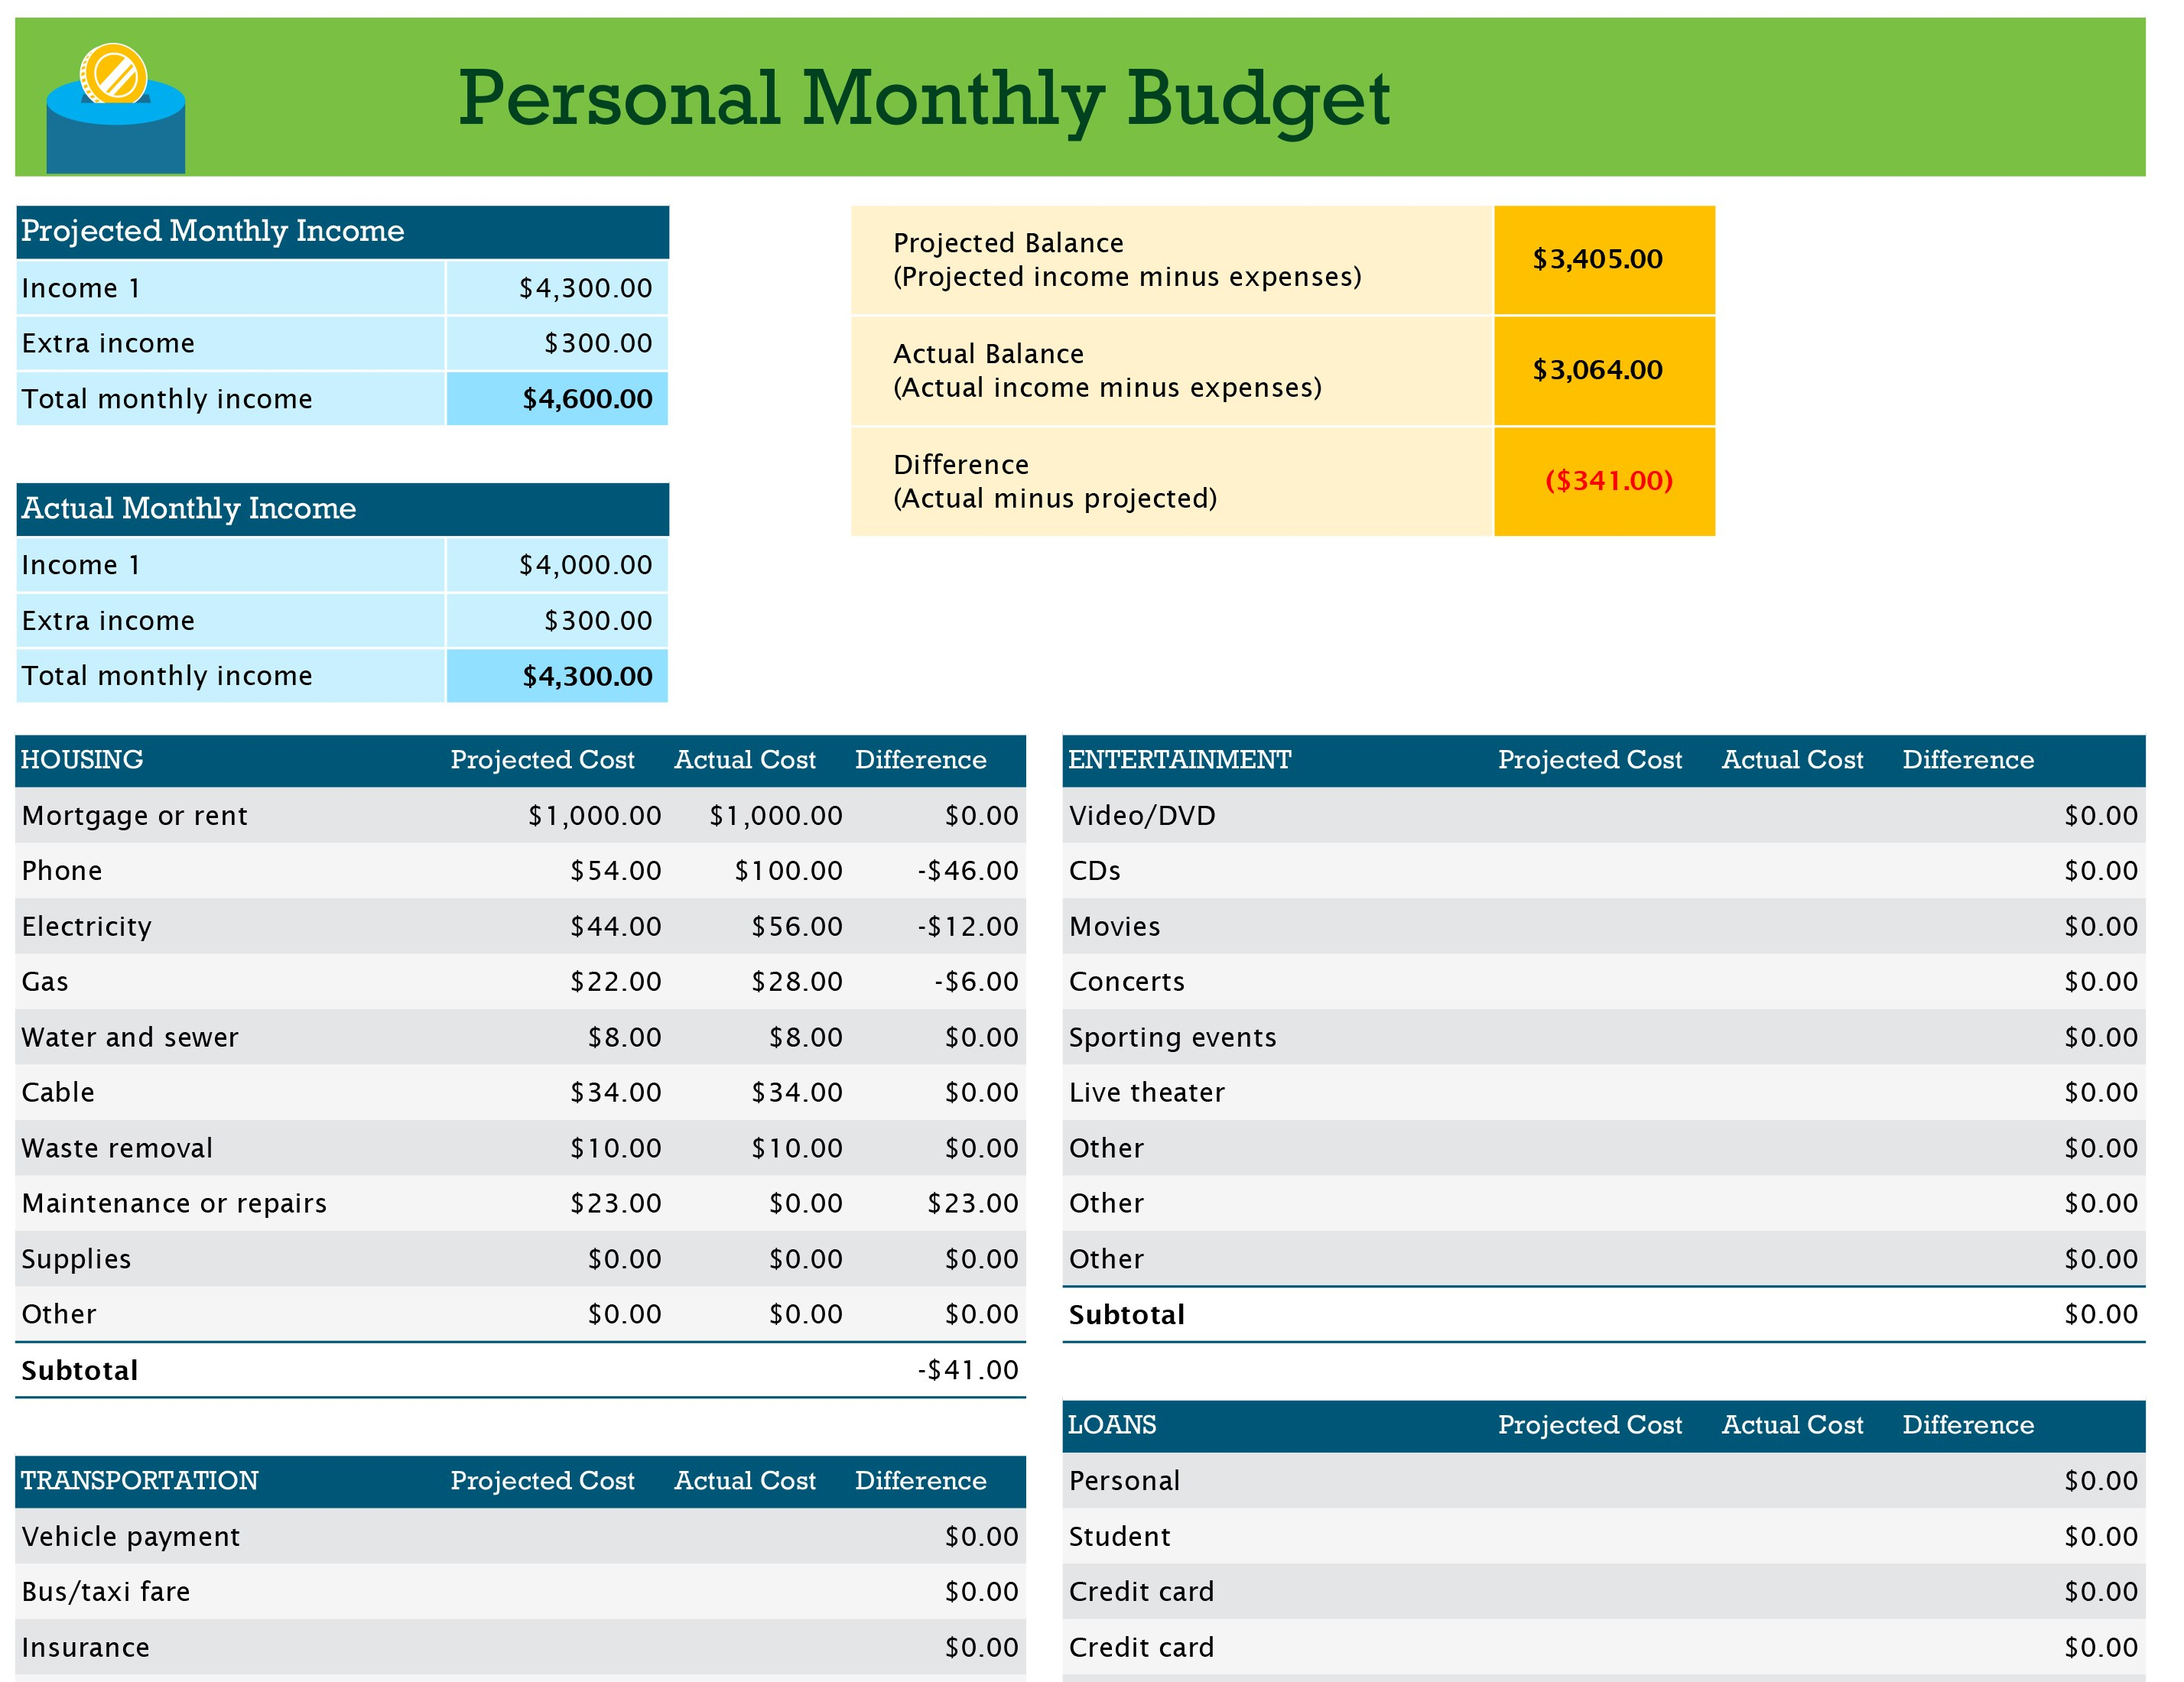 Personal Monthly Budget with Monthly Budget Spreadsheet